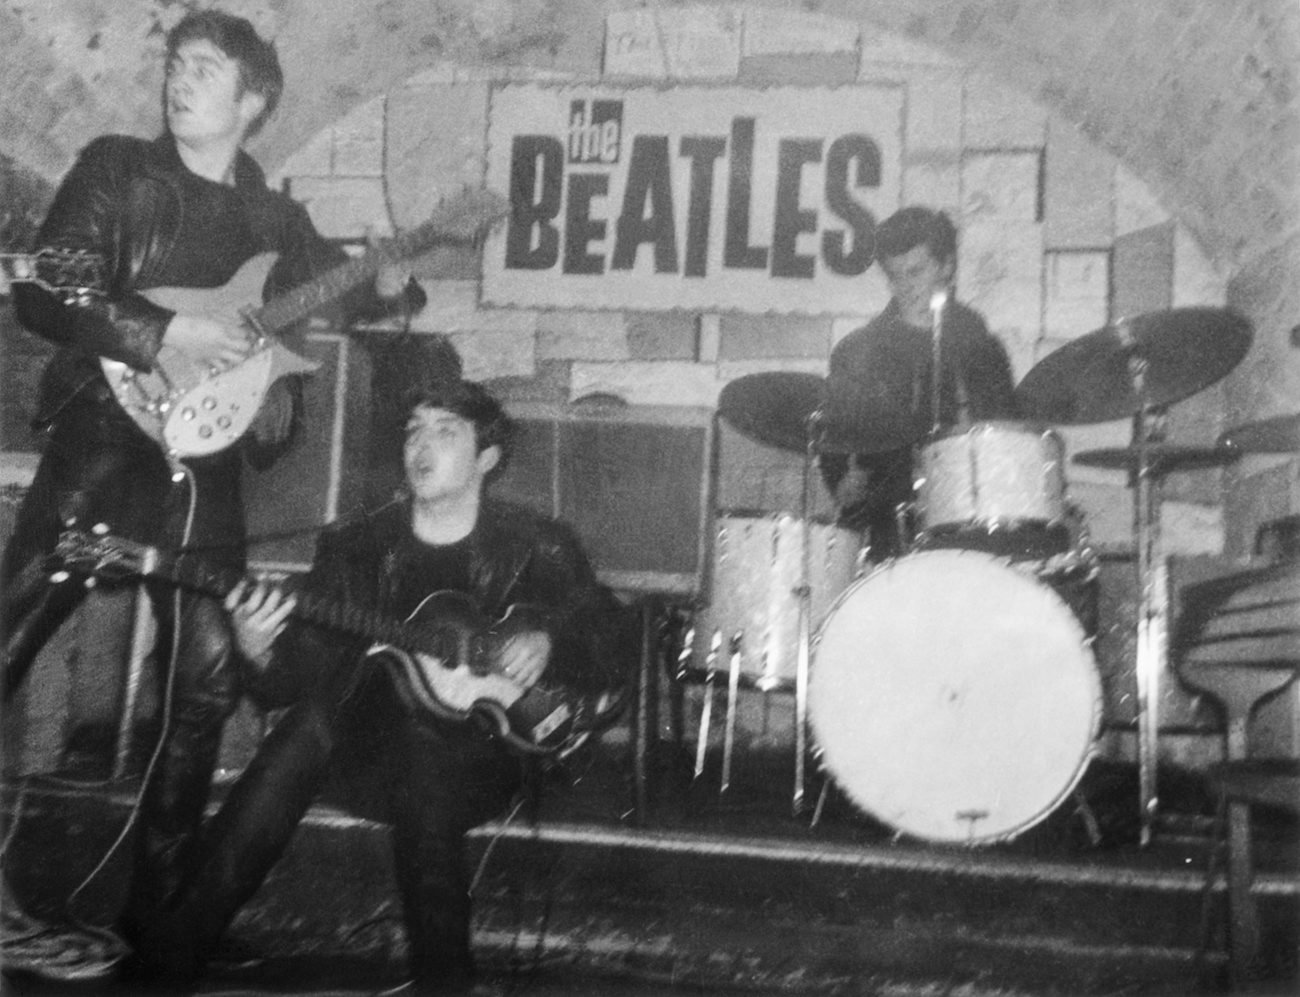 The Beatles performing at The Cavern Club in 1962.